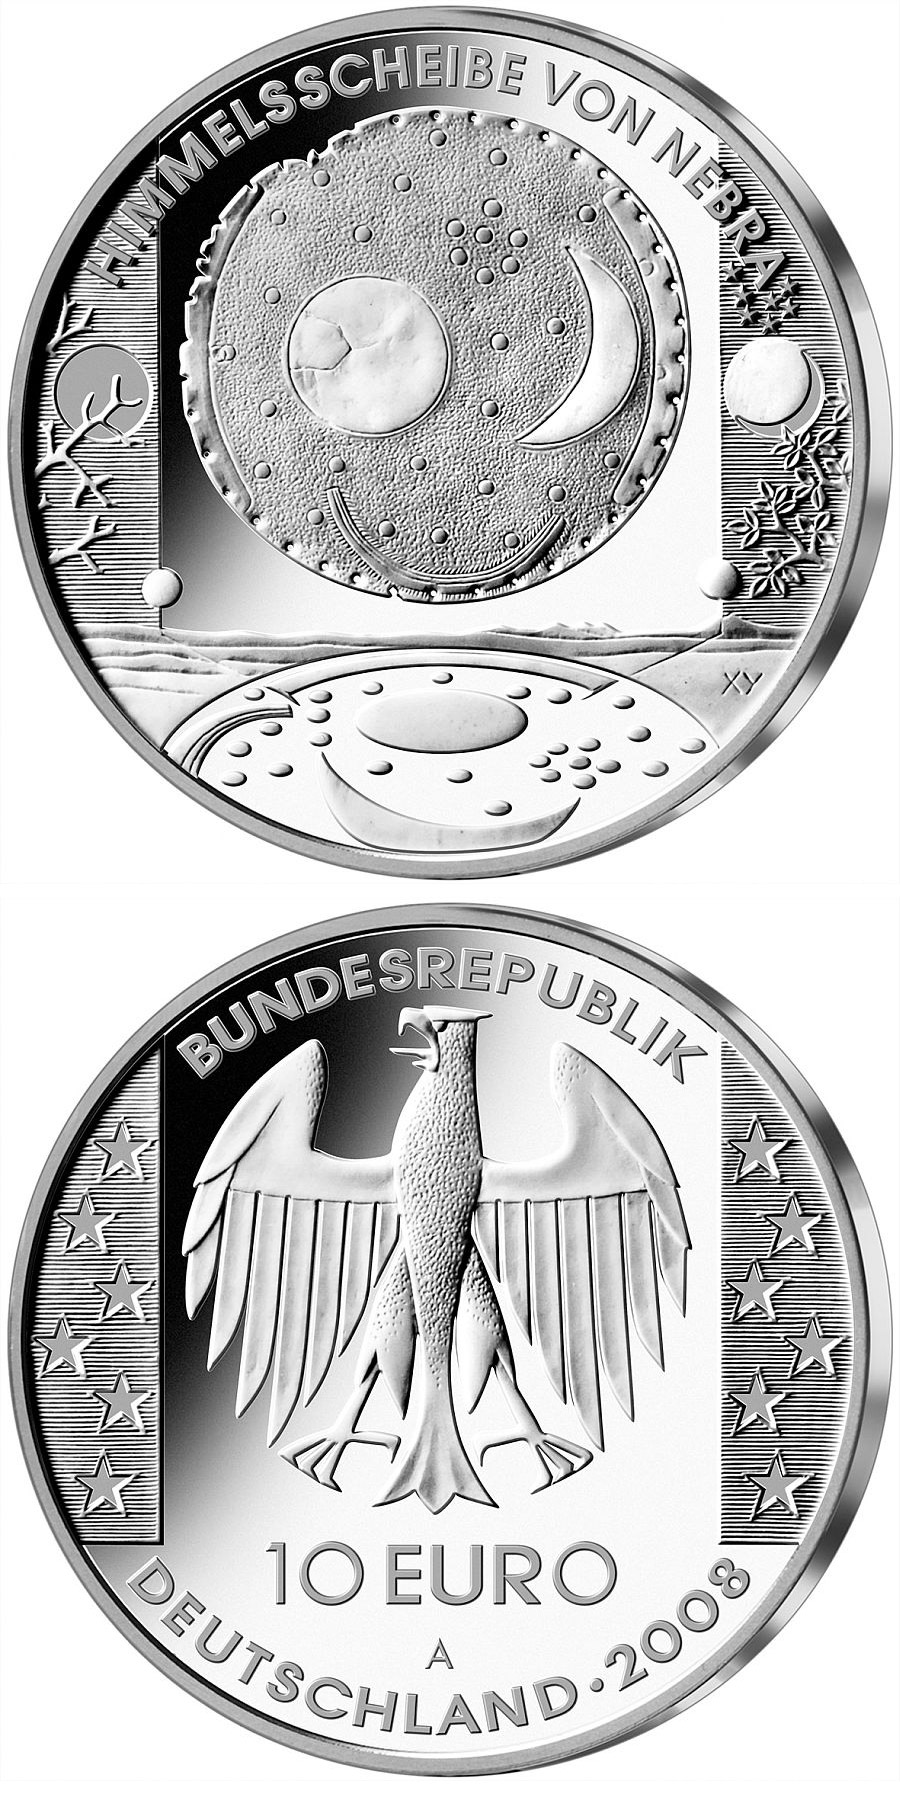 Image of 10 euro coin - Himmelsscheibe von Nebra | Germany 2008.  The Silver coin is of Proof, BU quality.